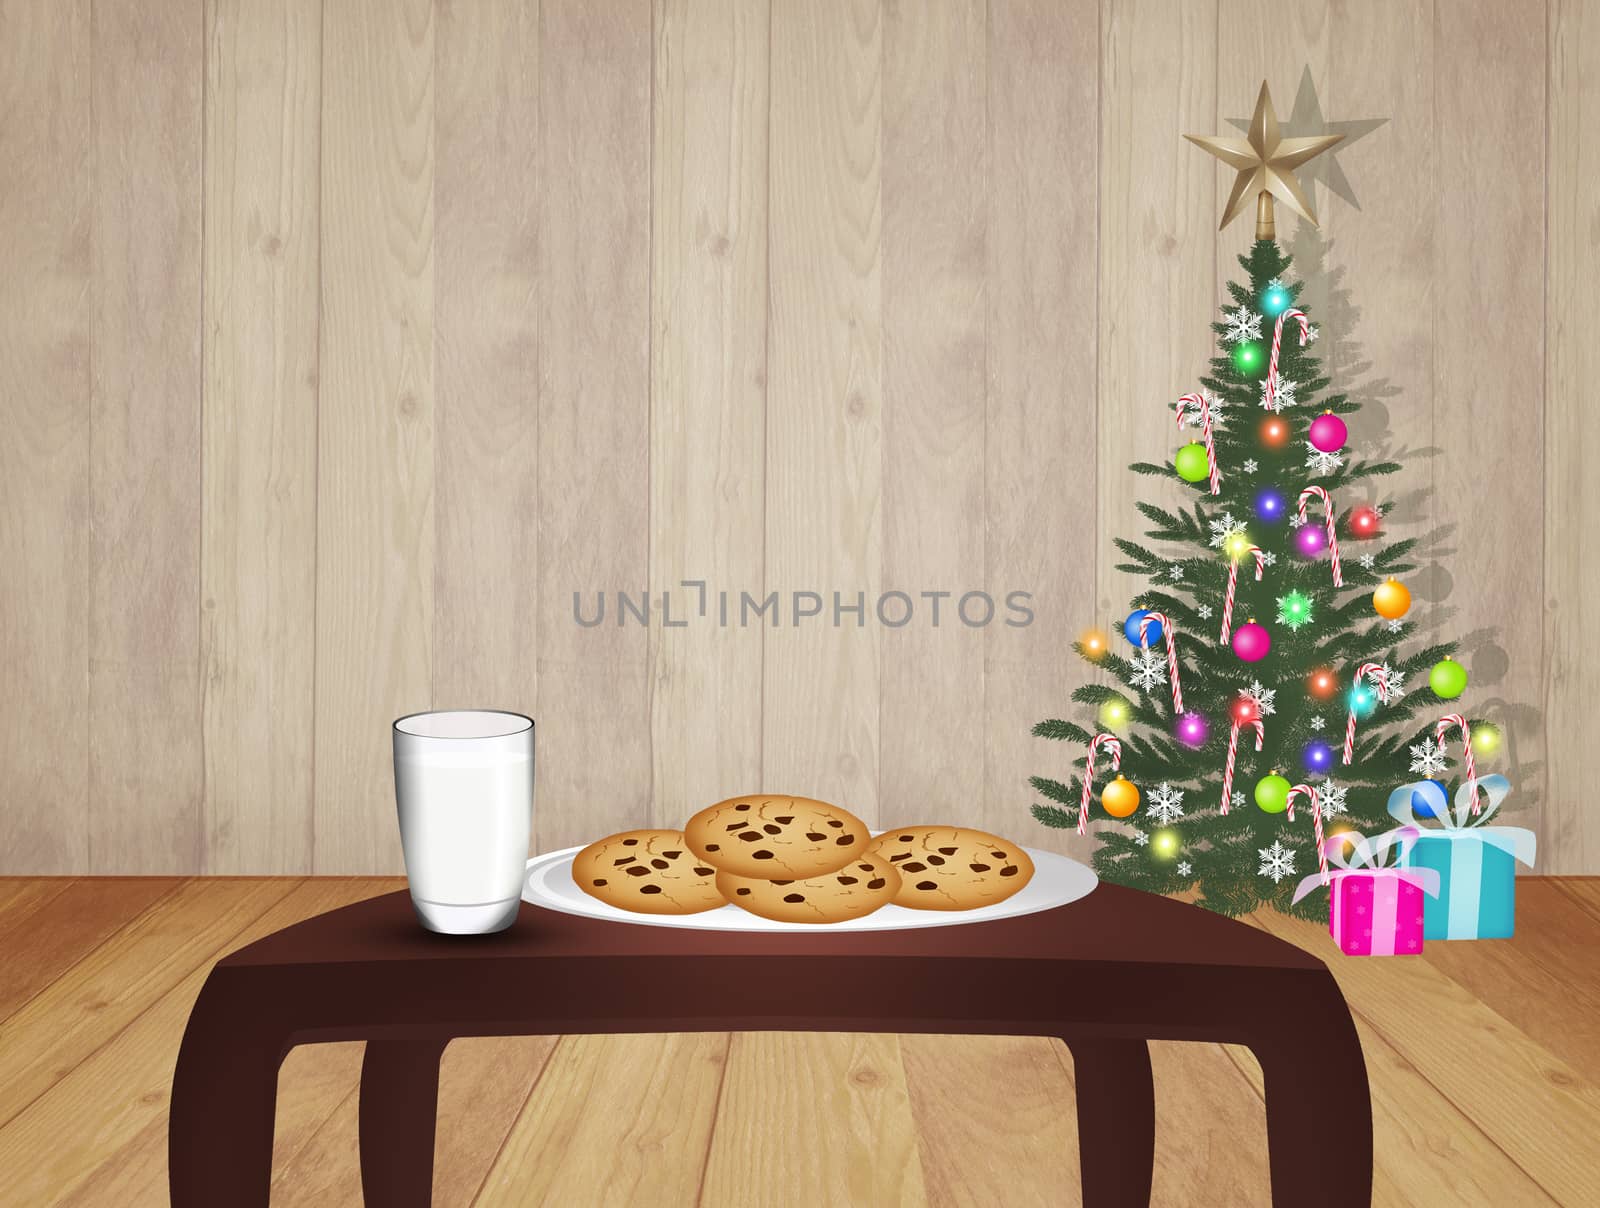 illustration of cookies and milk for Santa Claus